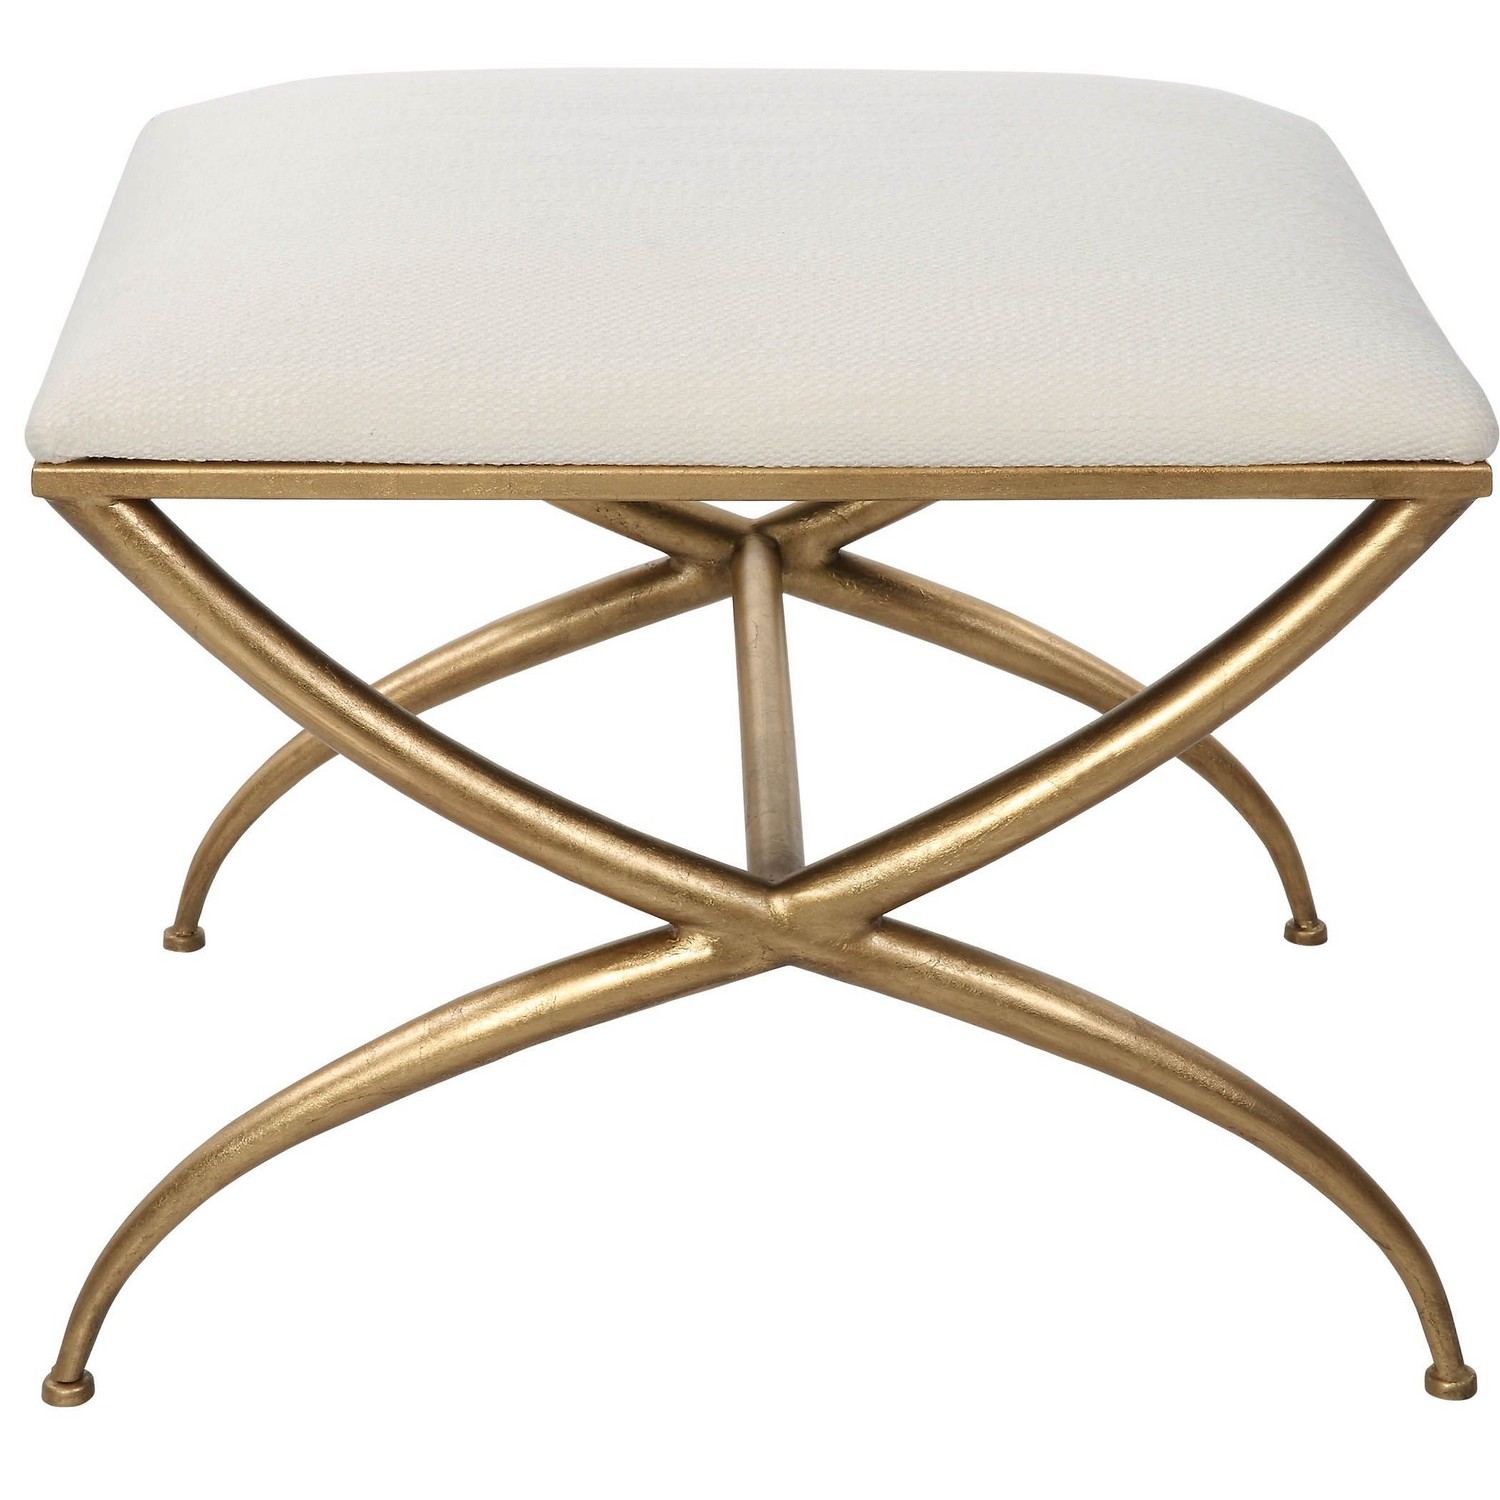 Uttermost Crossing Small Bench - White